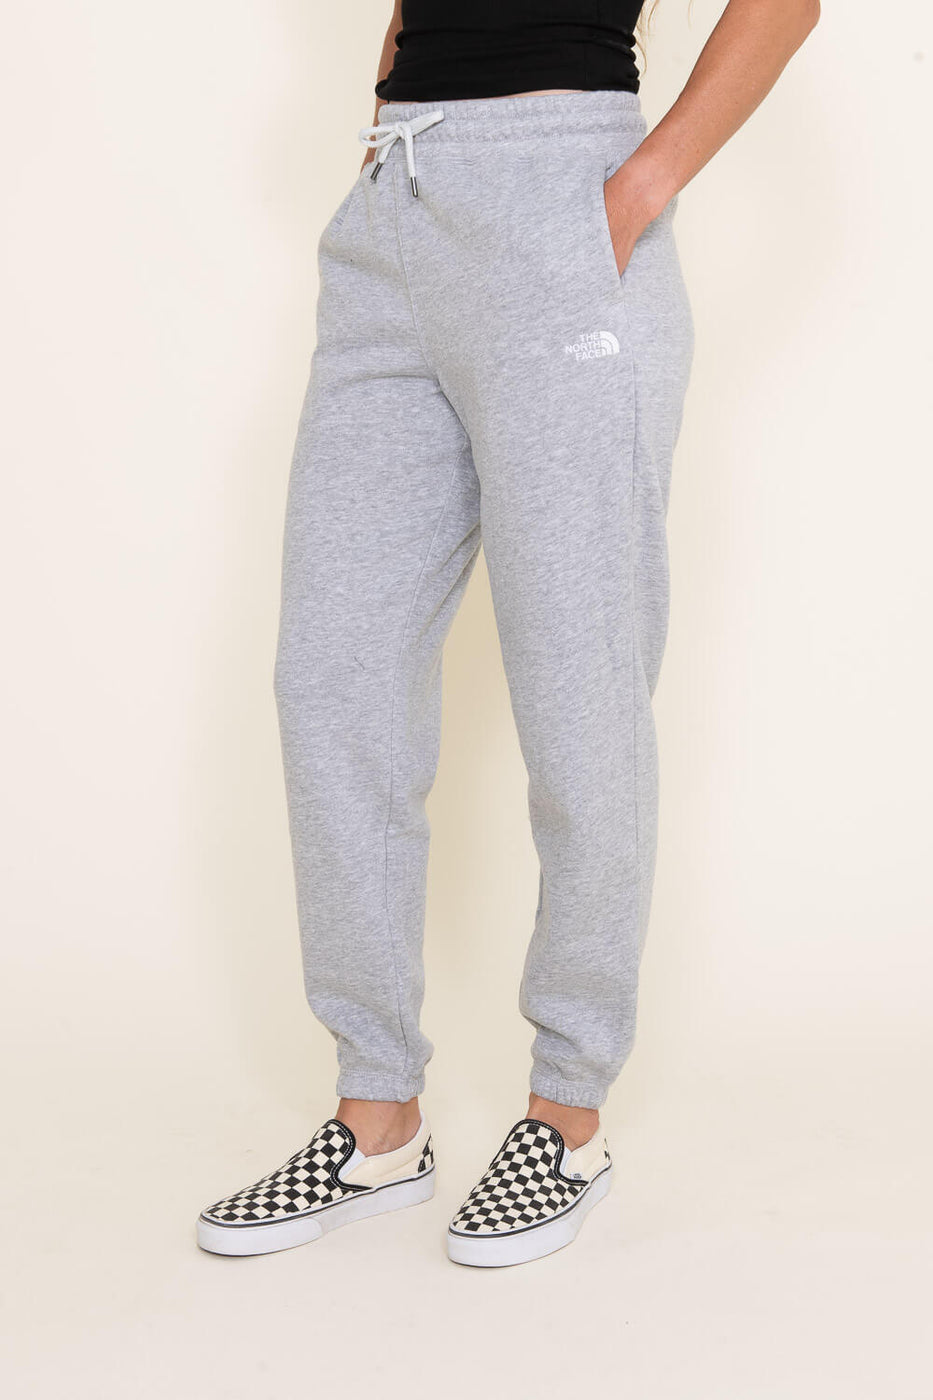 THE NORTH FACE Half Dome Womens Sweatpants - HEATHER GRAY, Tillys